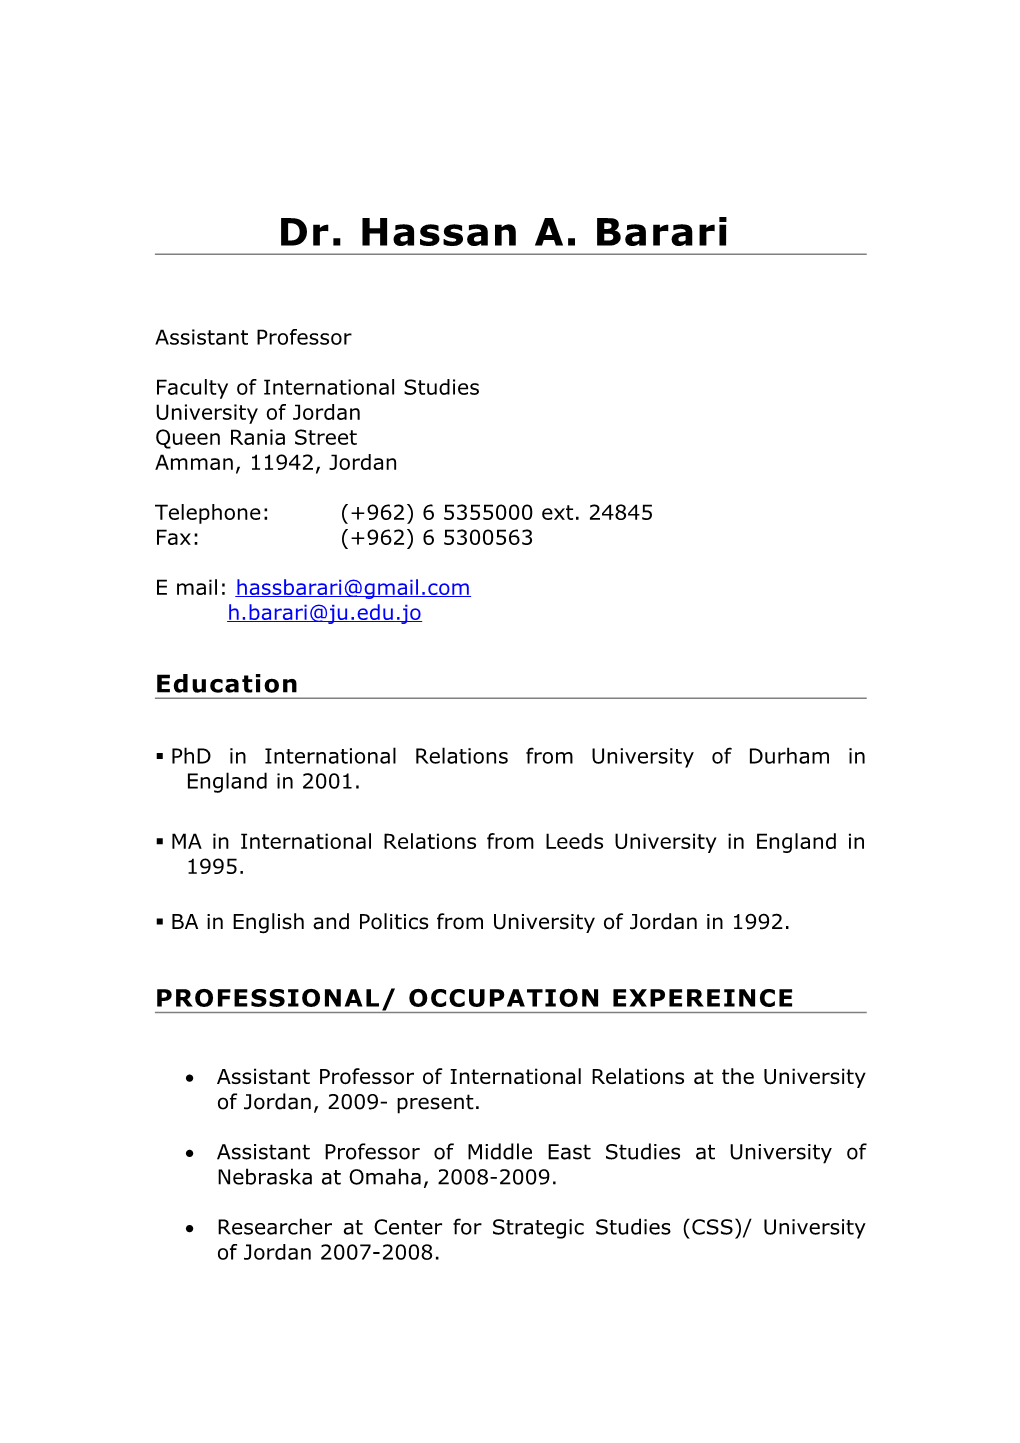 Example of a Researcher Profile